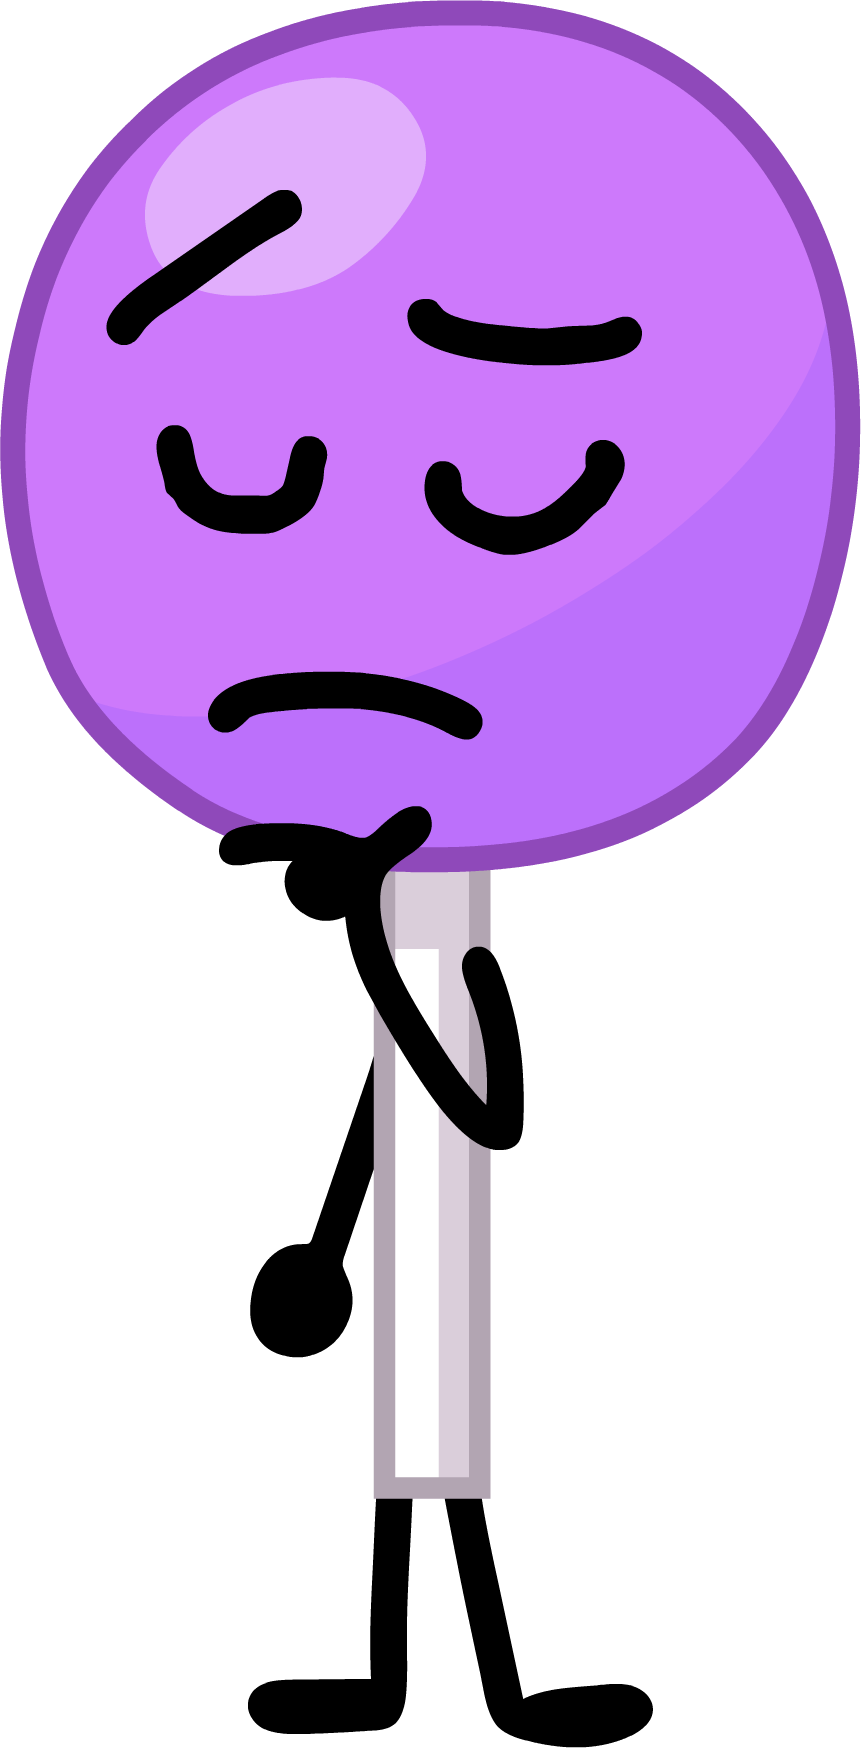 Lollipop from bfb